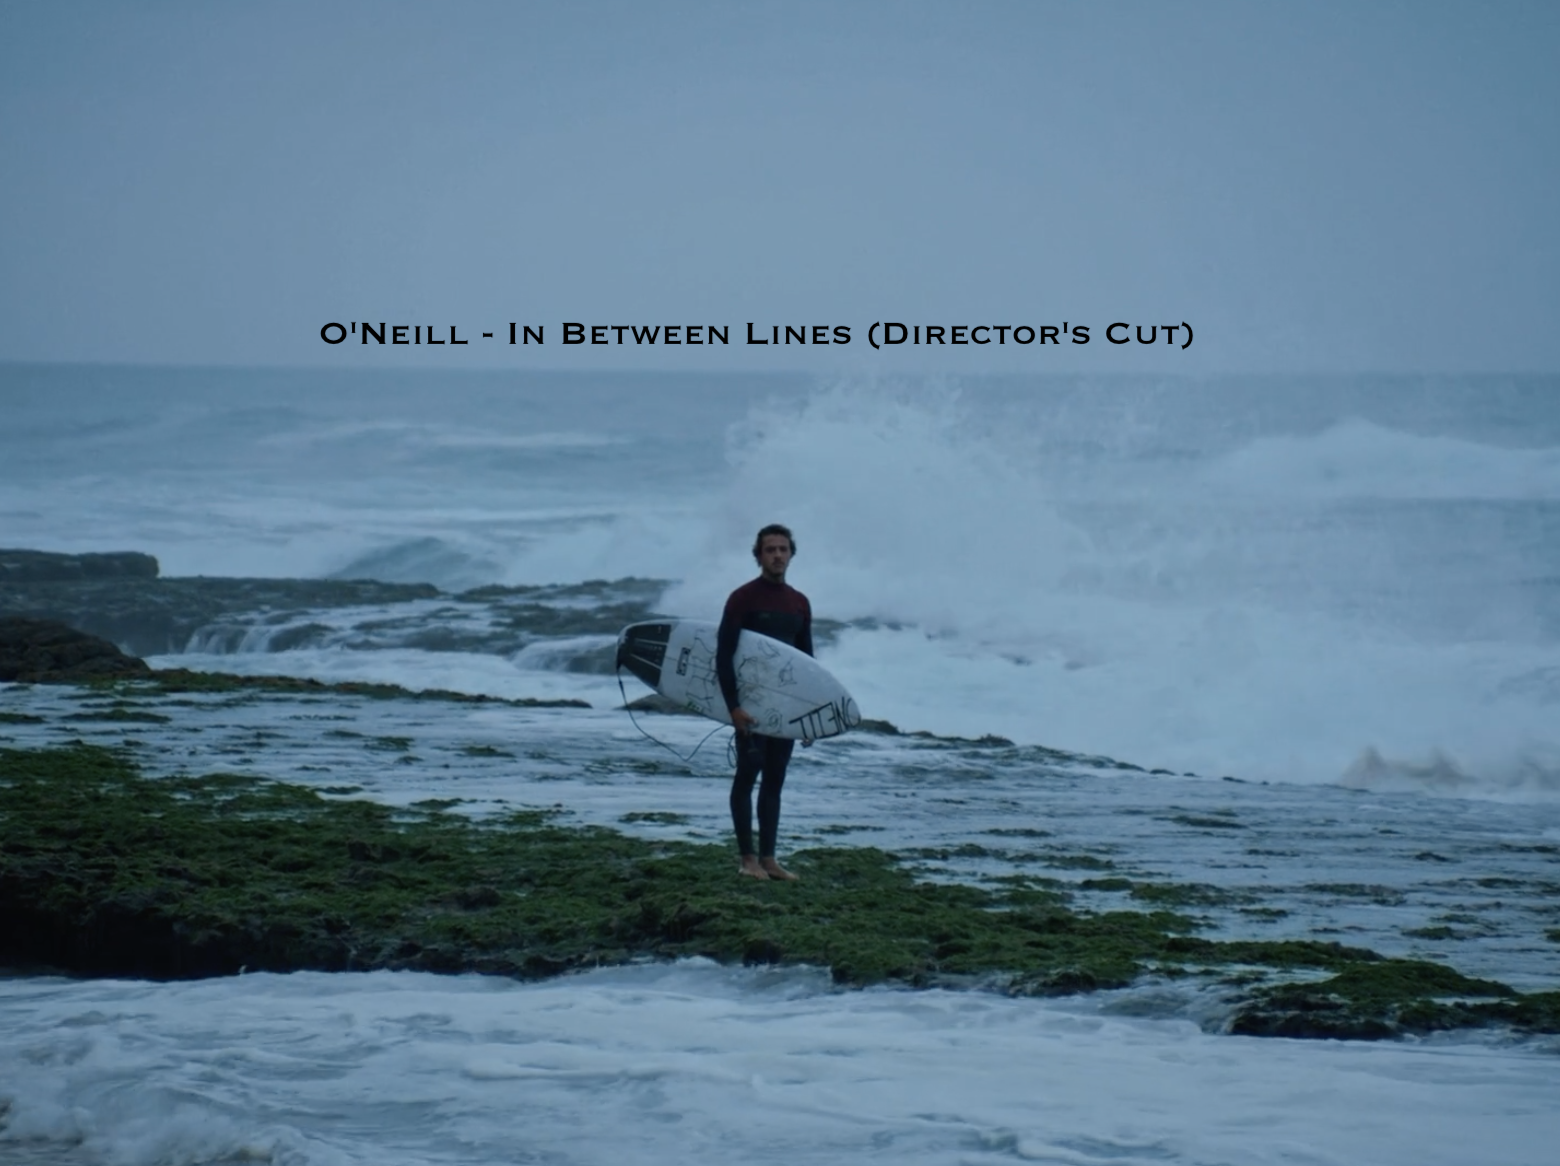 ws13 O'Neill - In Between Lines (Director's Cut).png